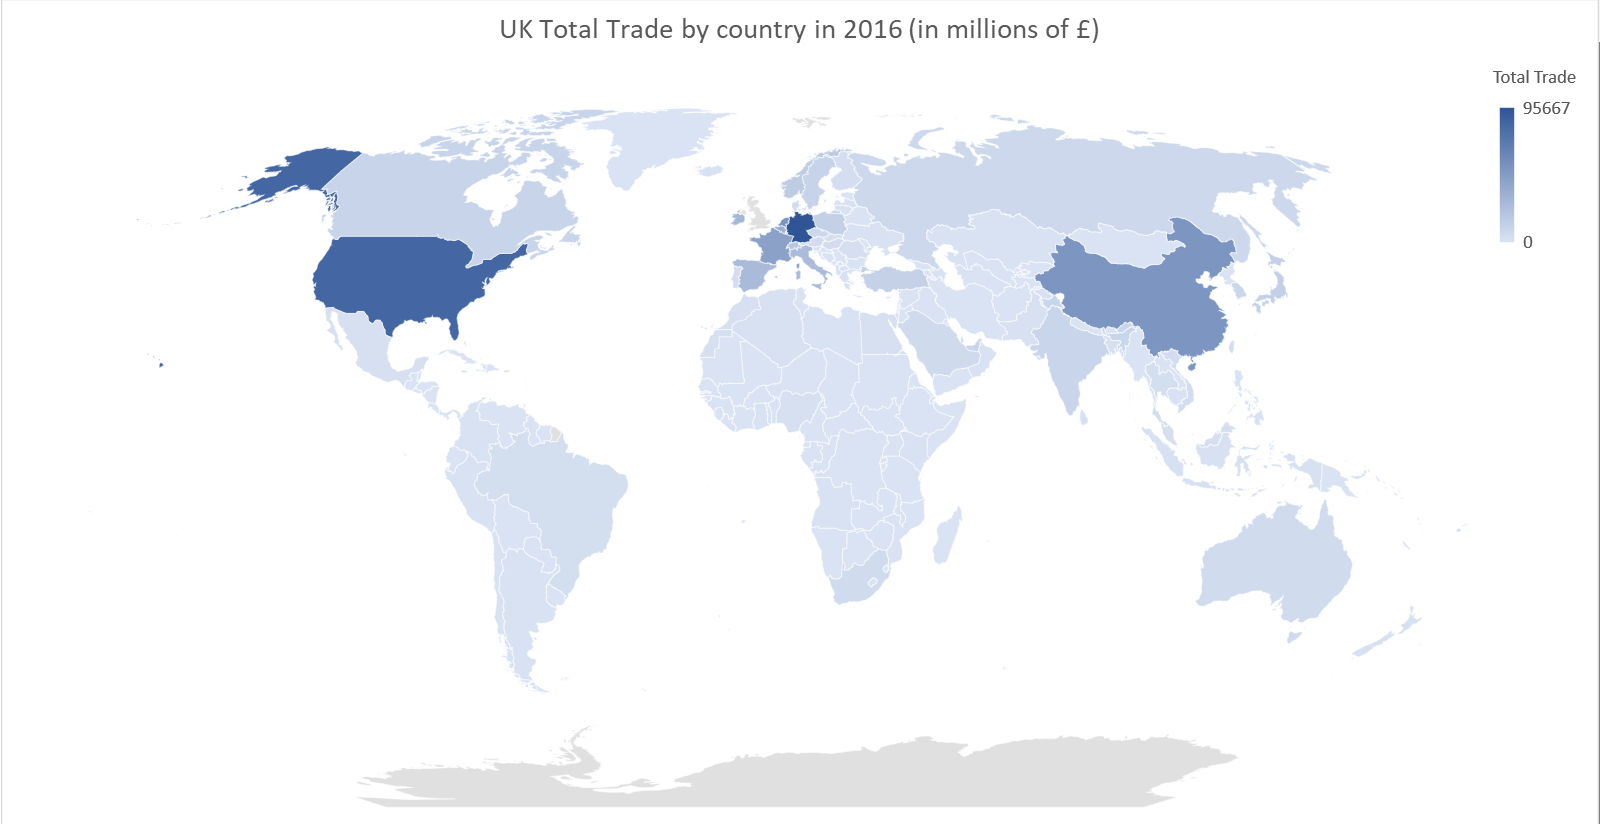 UK total trade by country in 2016